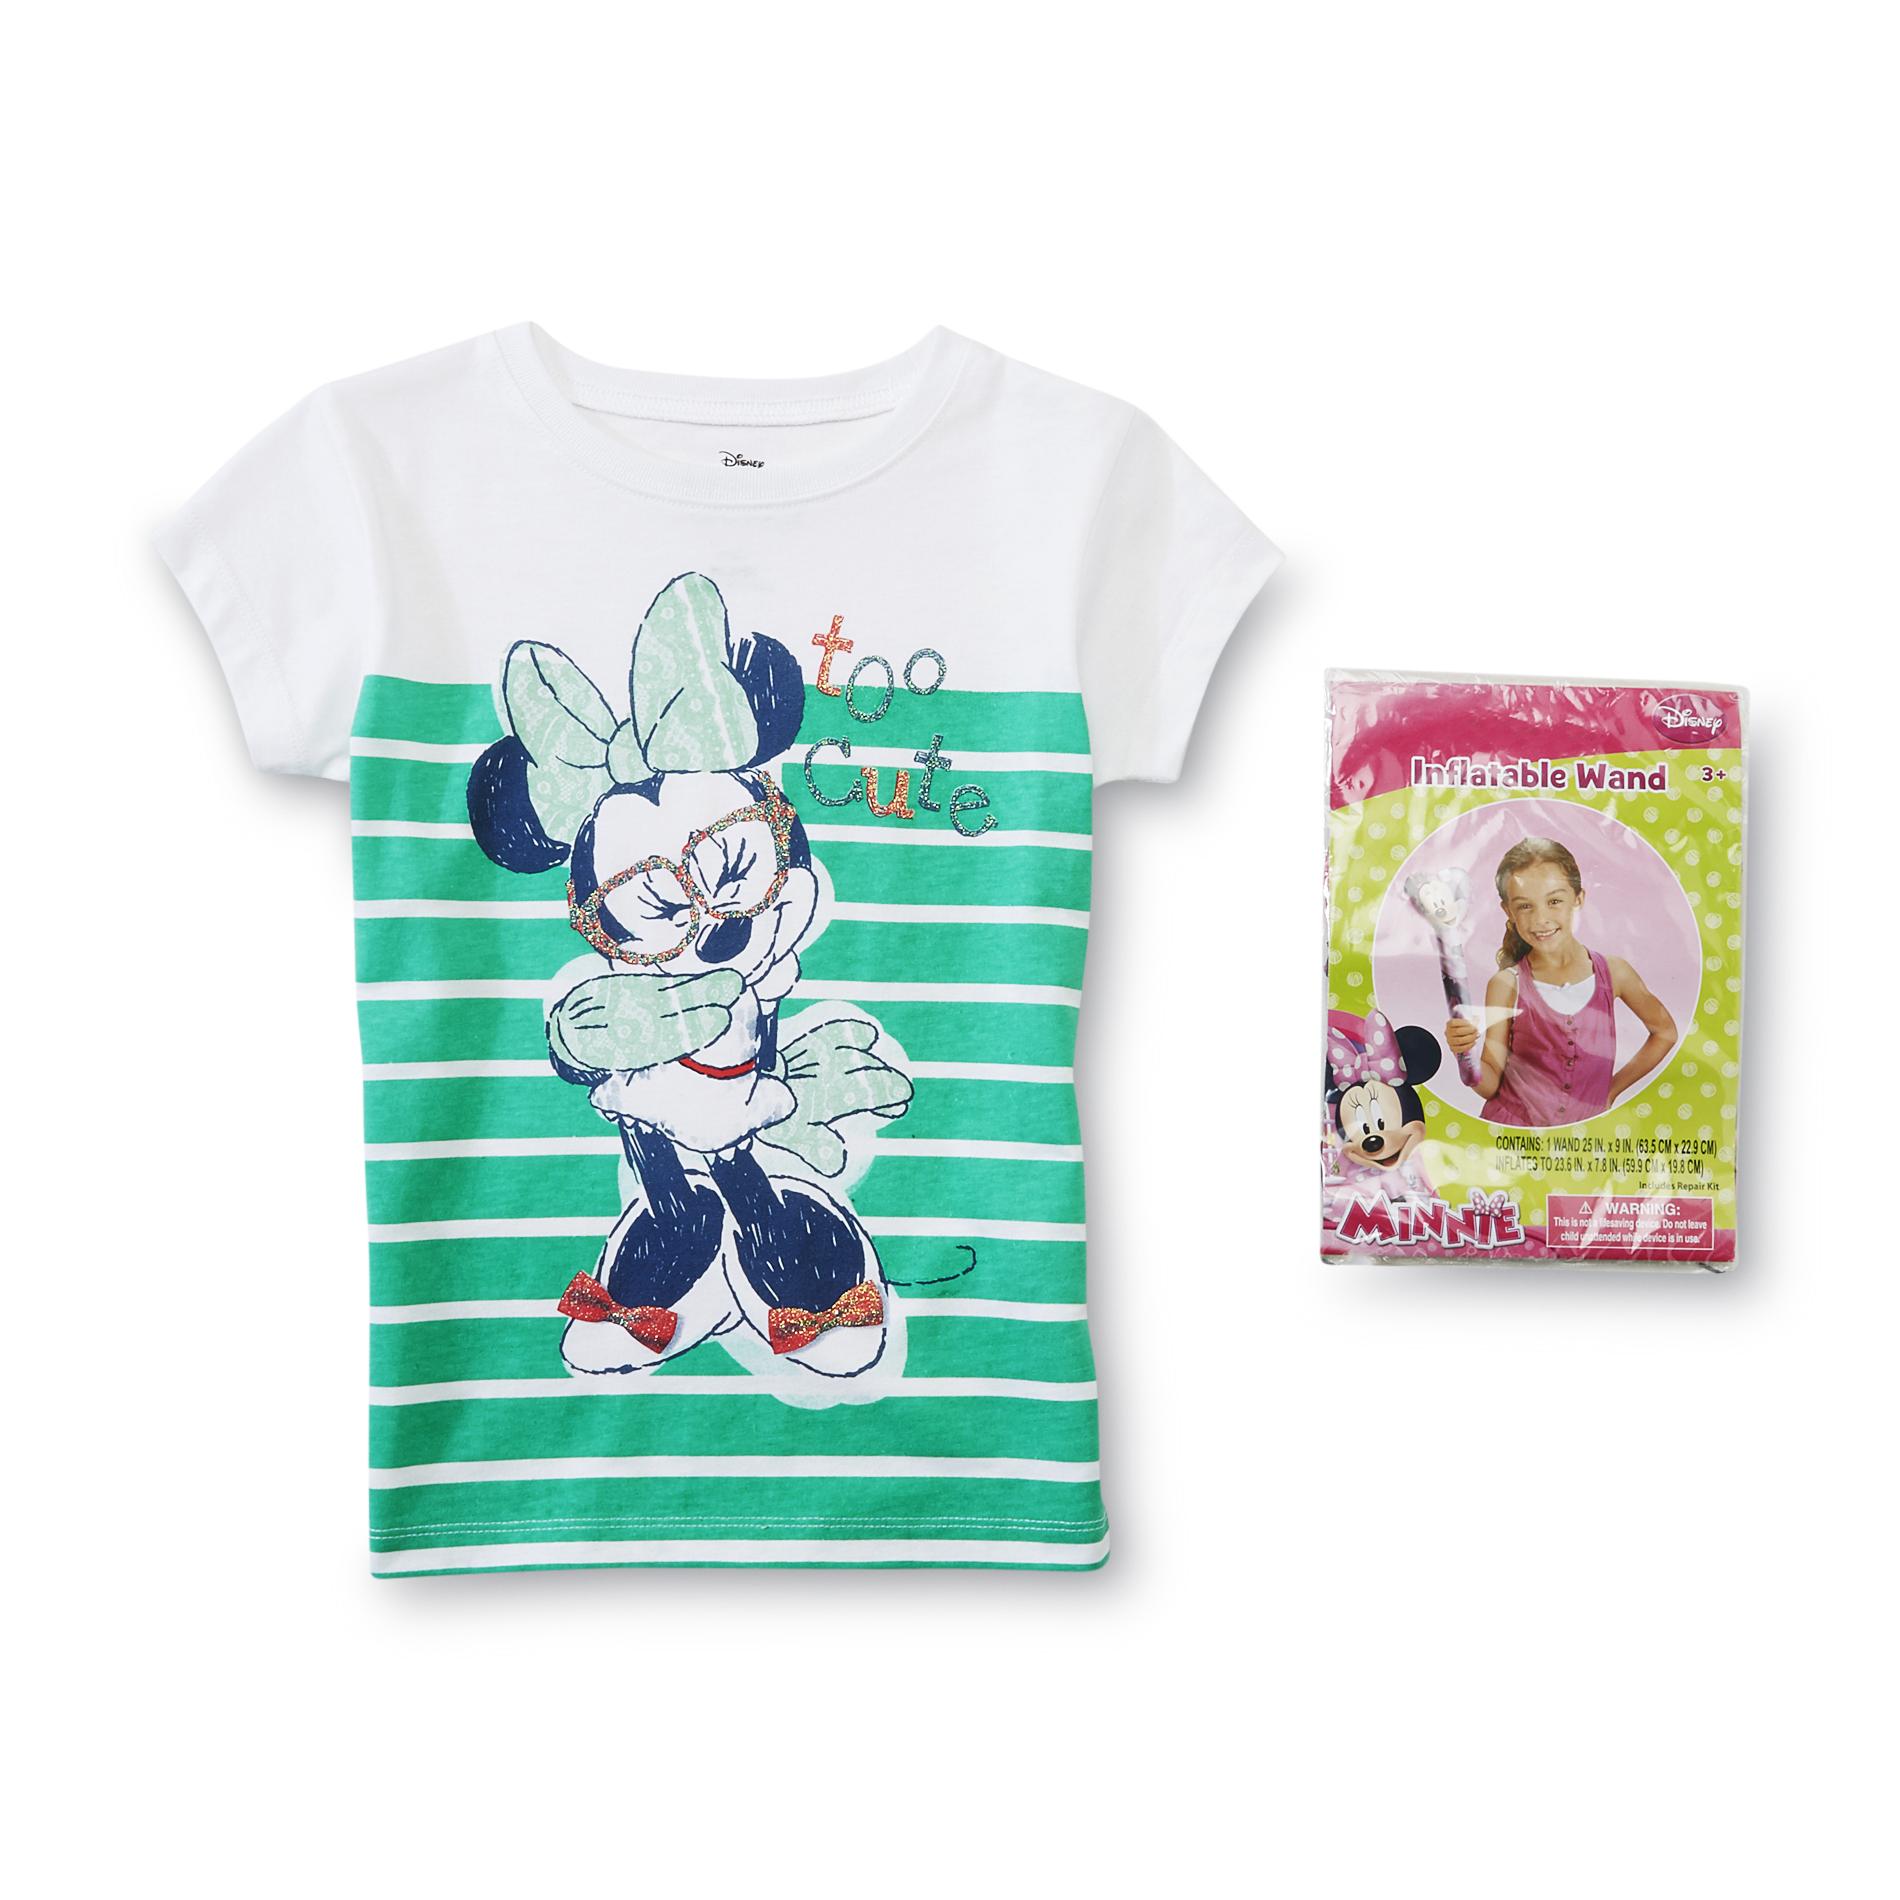 Disney Minnie Mouse Girl's Graphic T-Shirt & Inflatable Wand